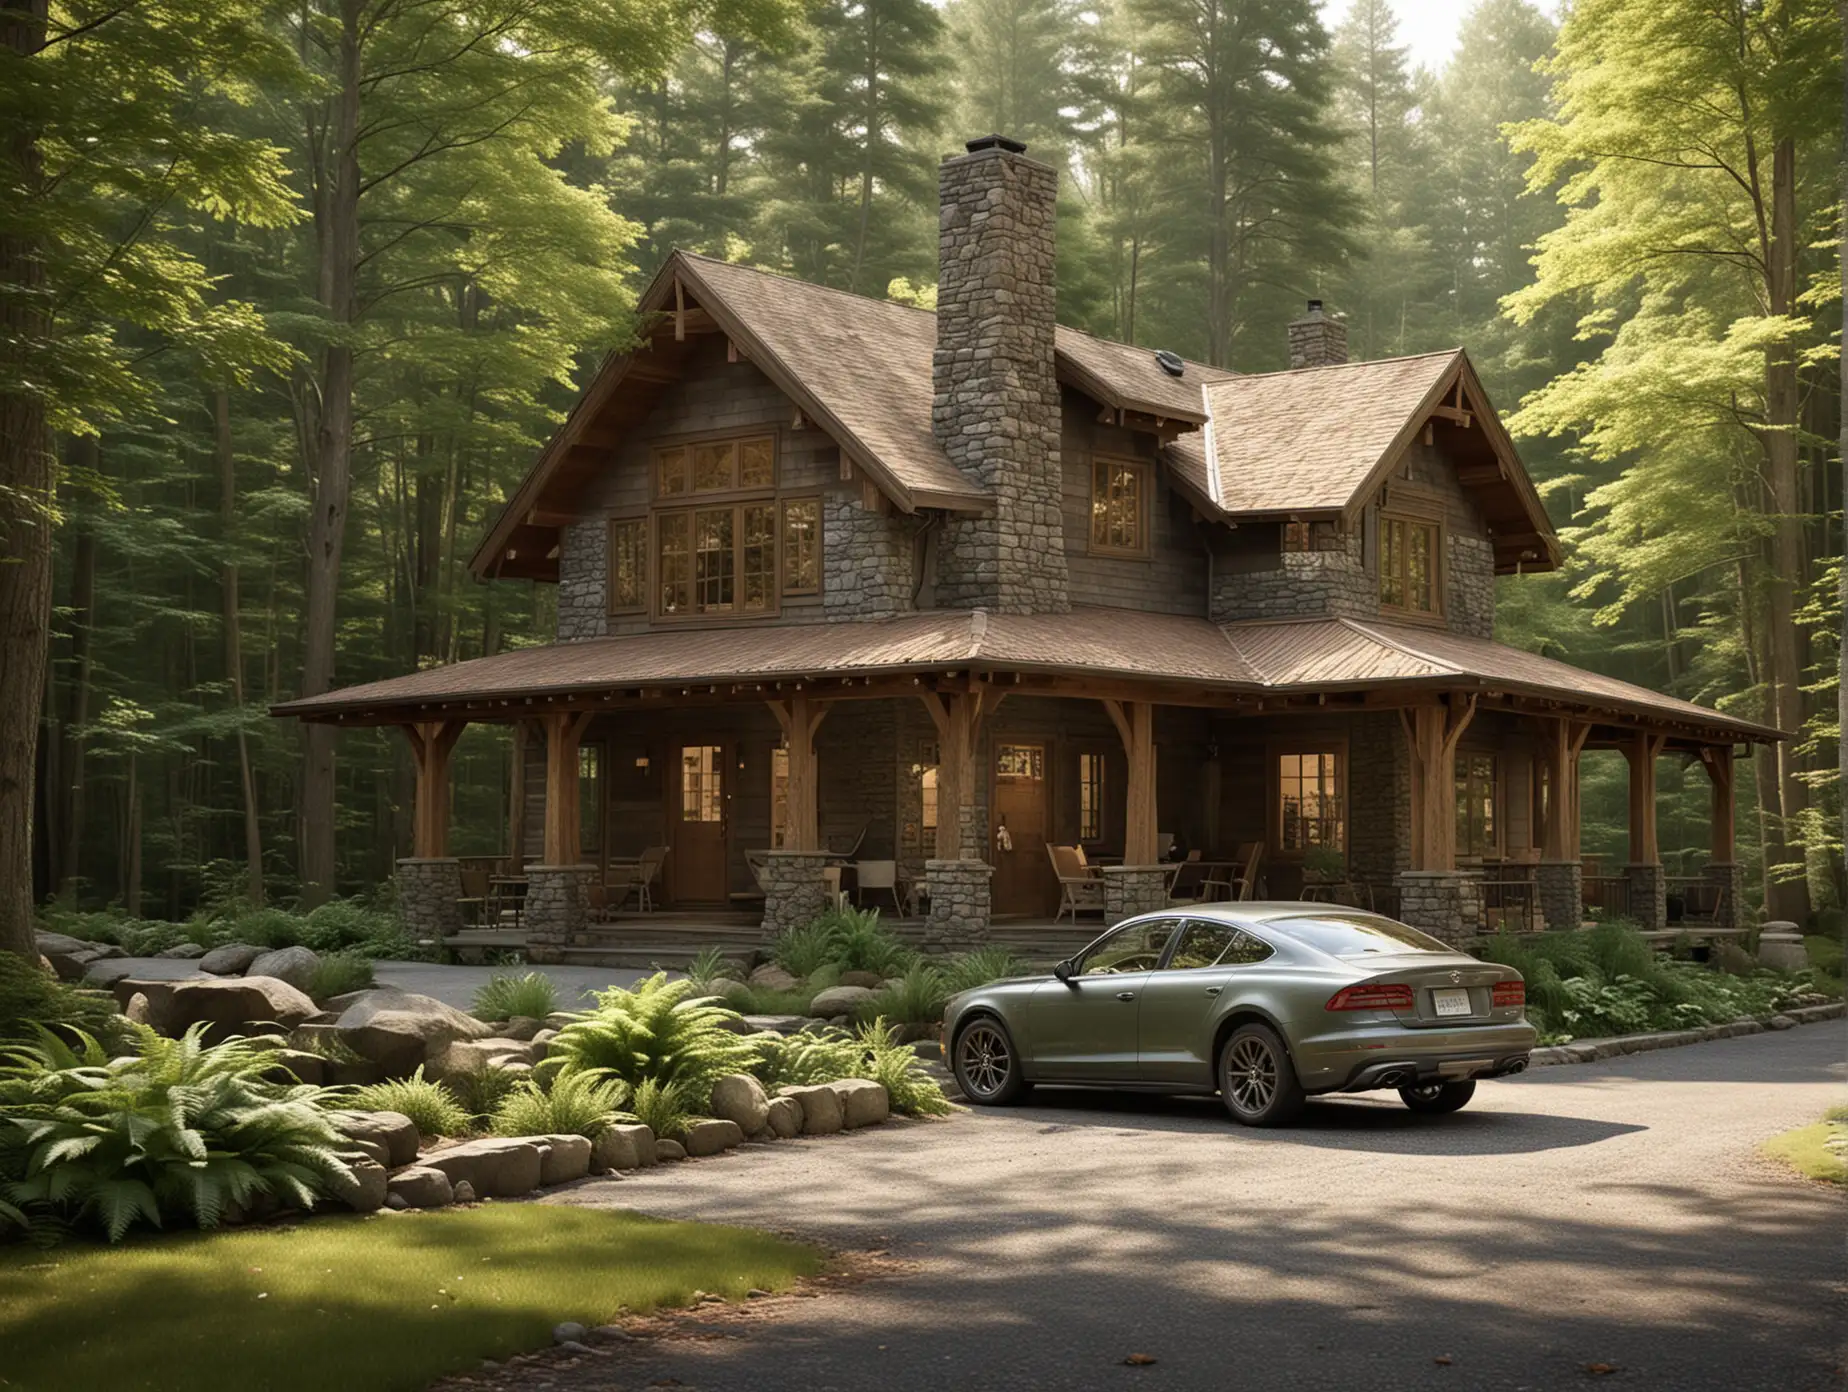 Rustic-Forest-Cabin-with-Stylish-Car-Tranquil-Retreat-in-Nature